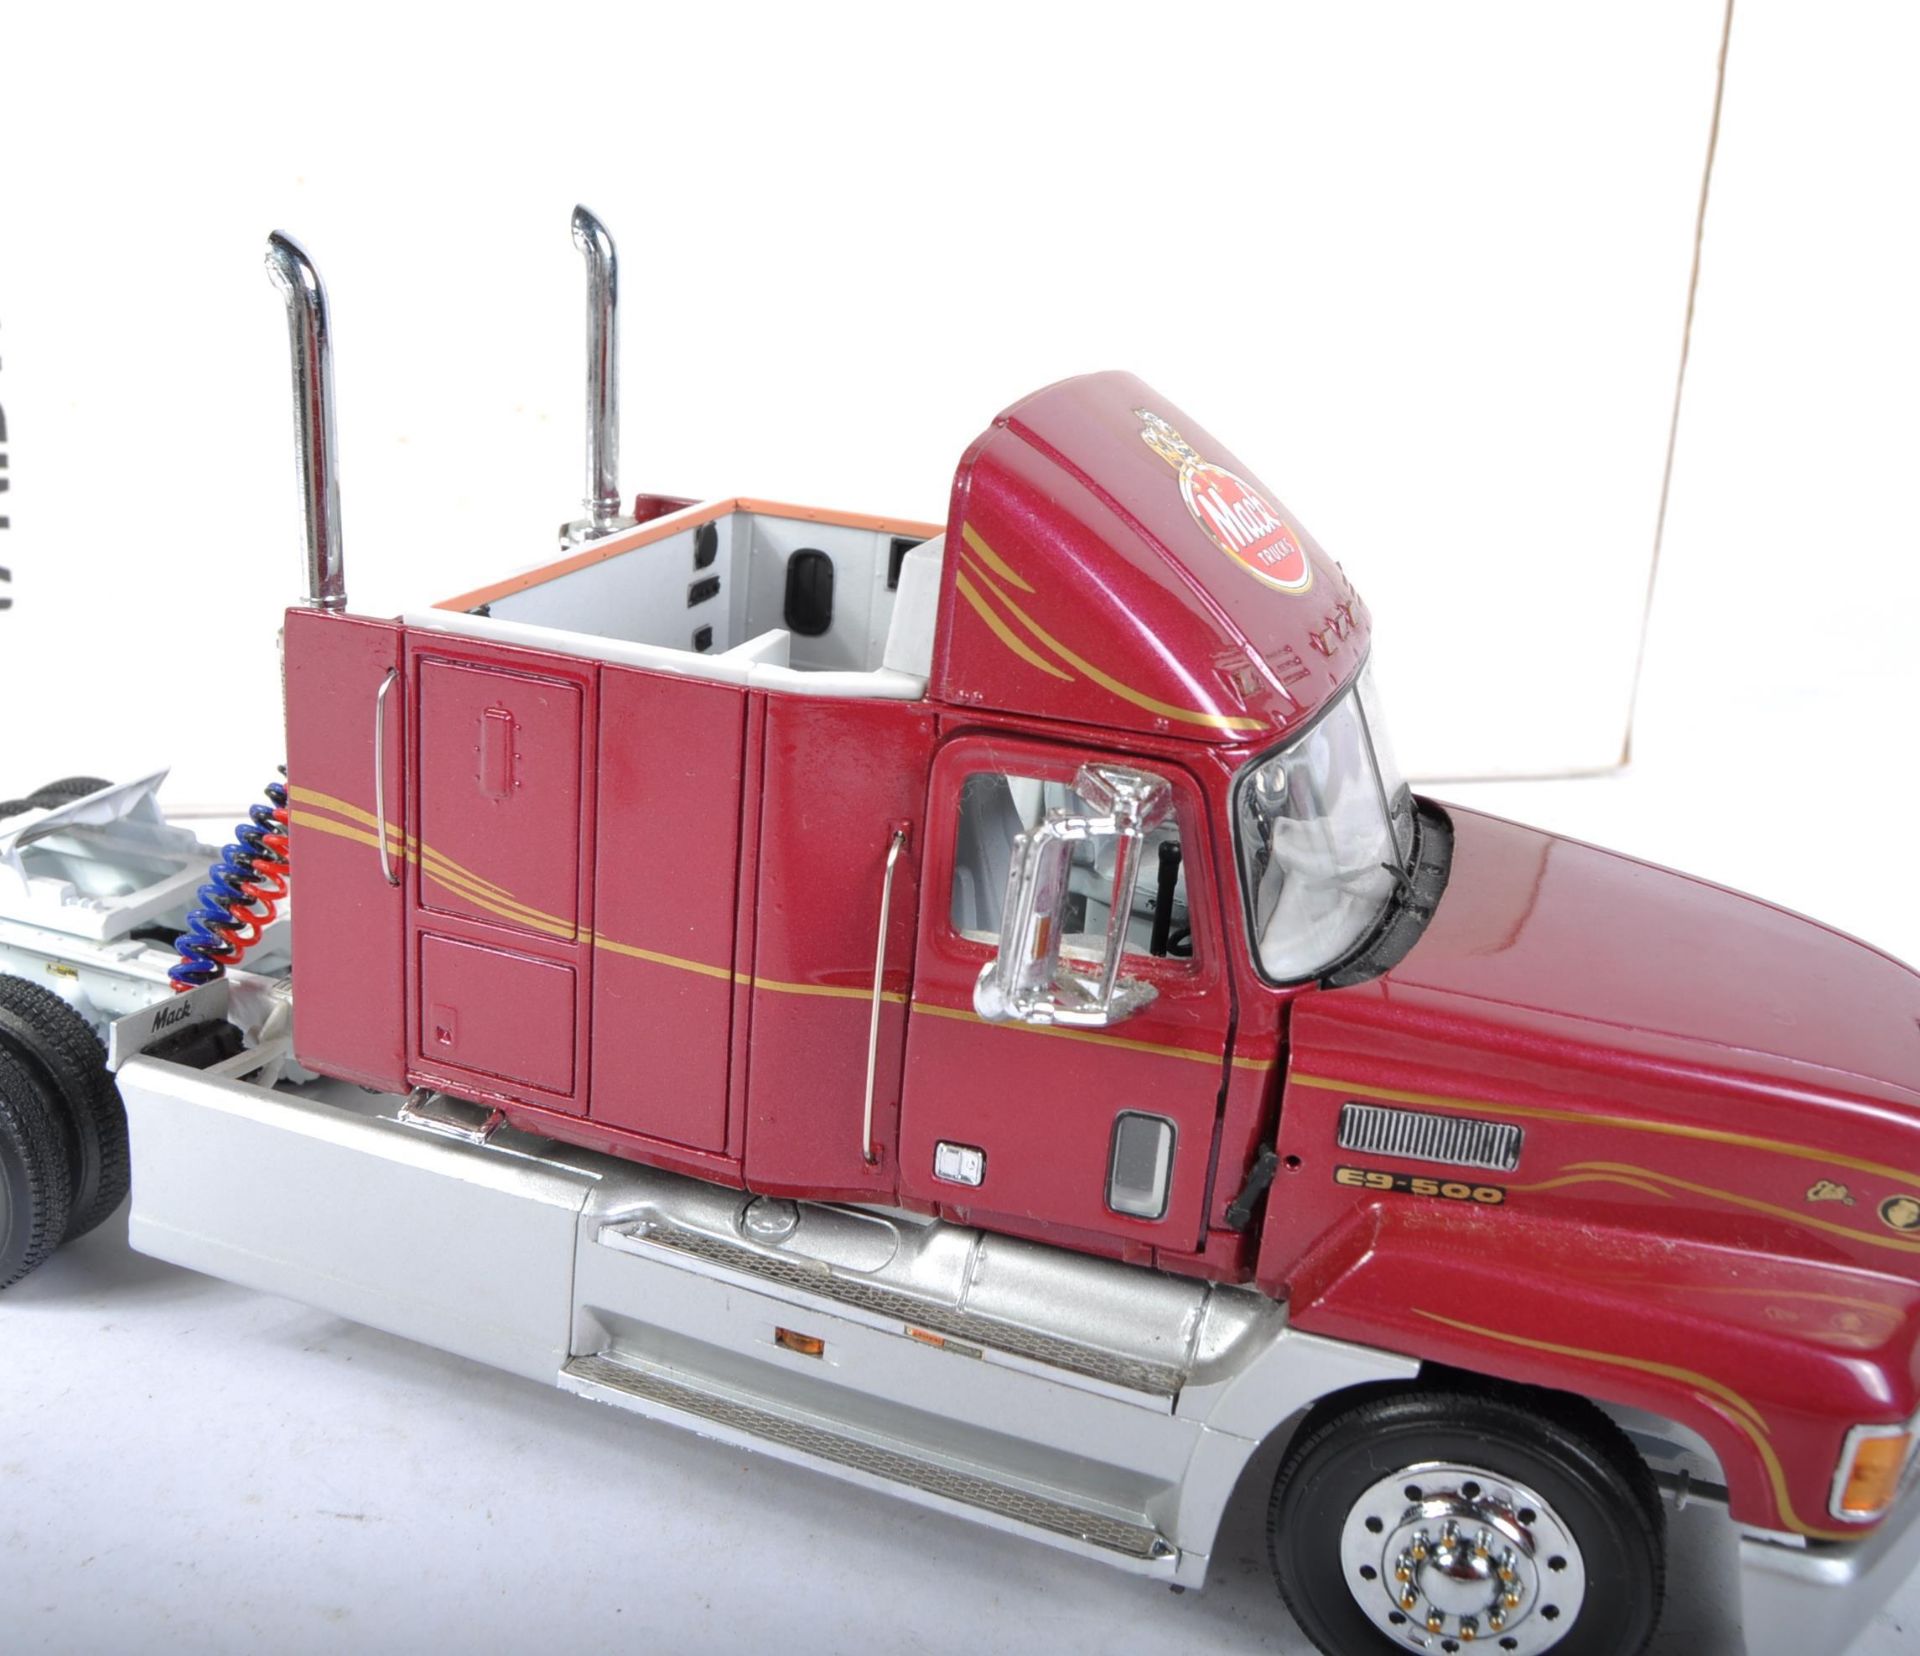 FRANKLIN MINT 1/32 SCALE PRECISION DIECAST MACK ELIITE TRUCK - Image 6 of 6